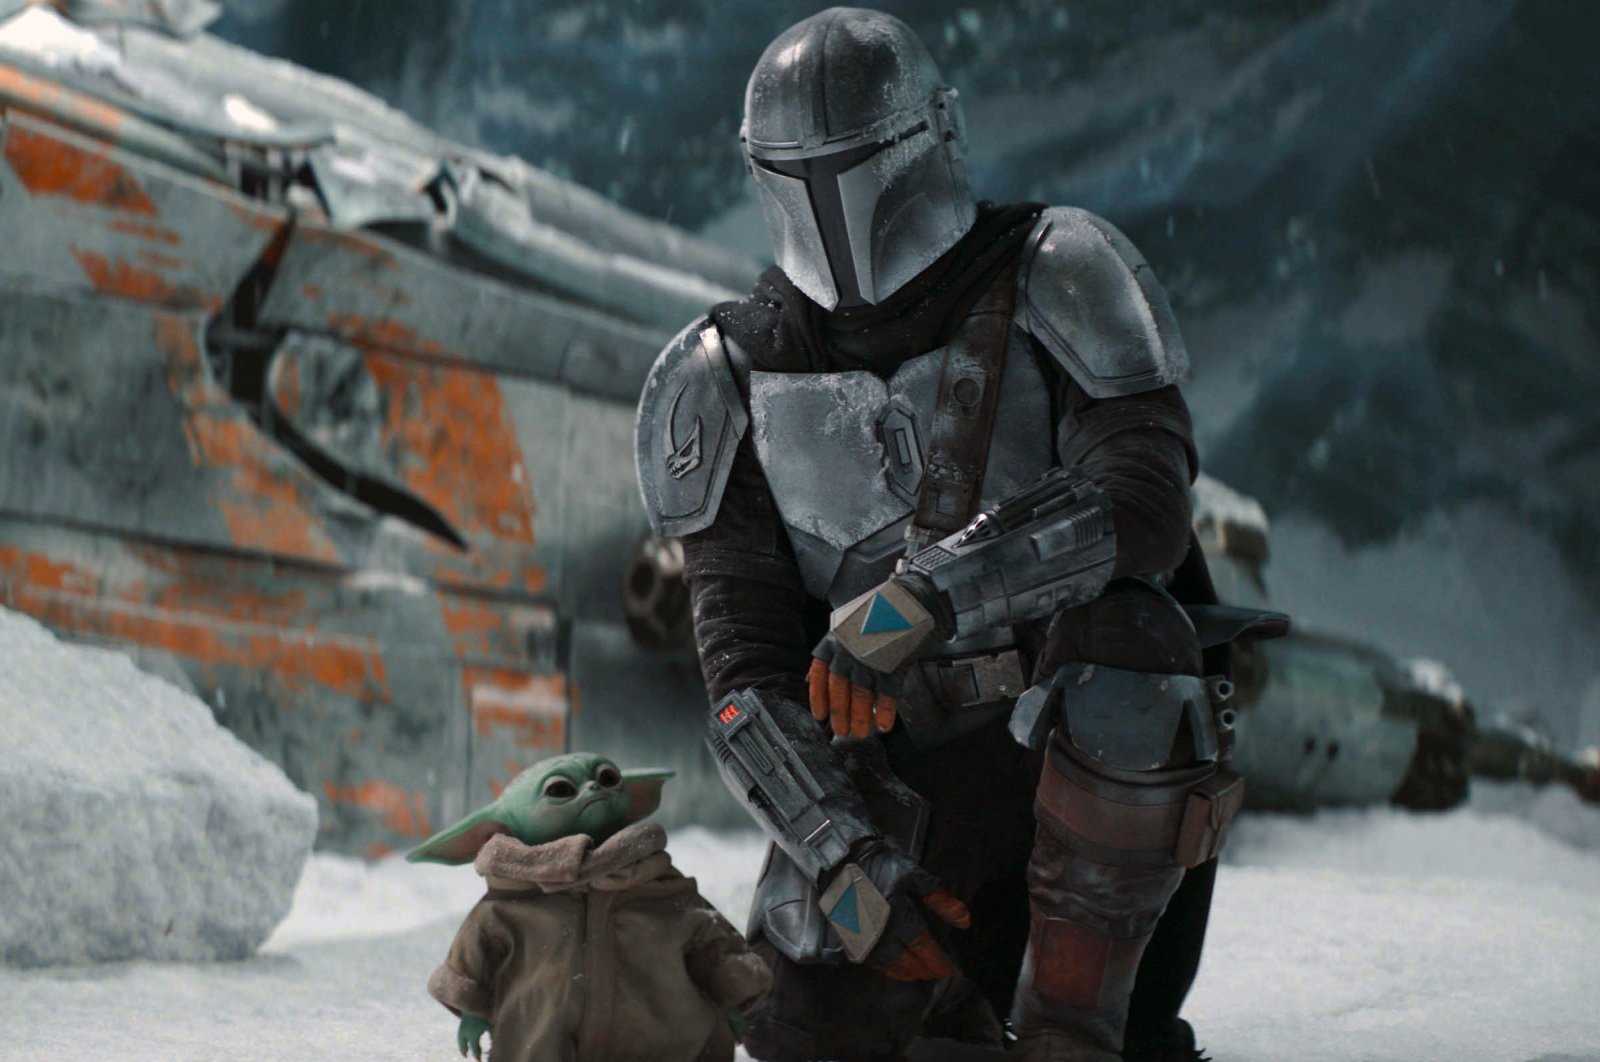 This image released by Disney+ shows Pedro Pascal in a scene from "The Mandalorian." (Disney+ via AP)